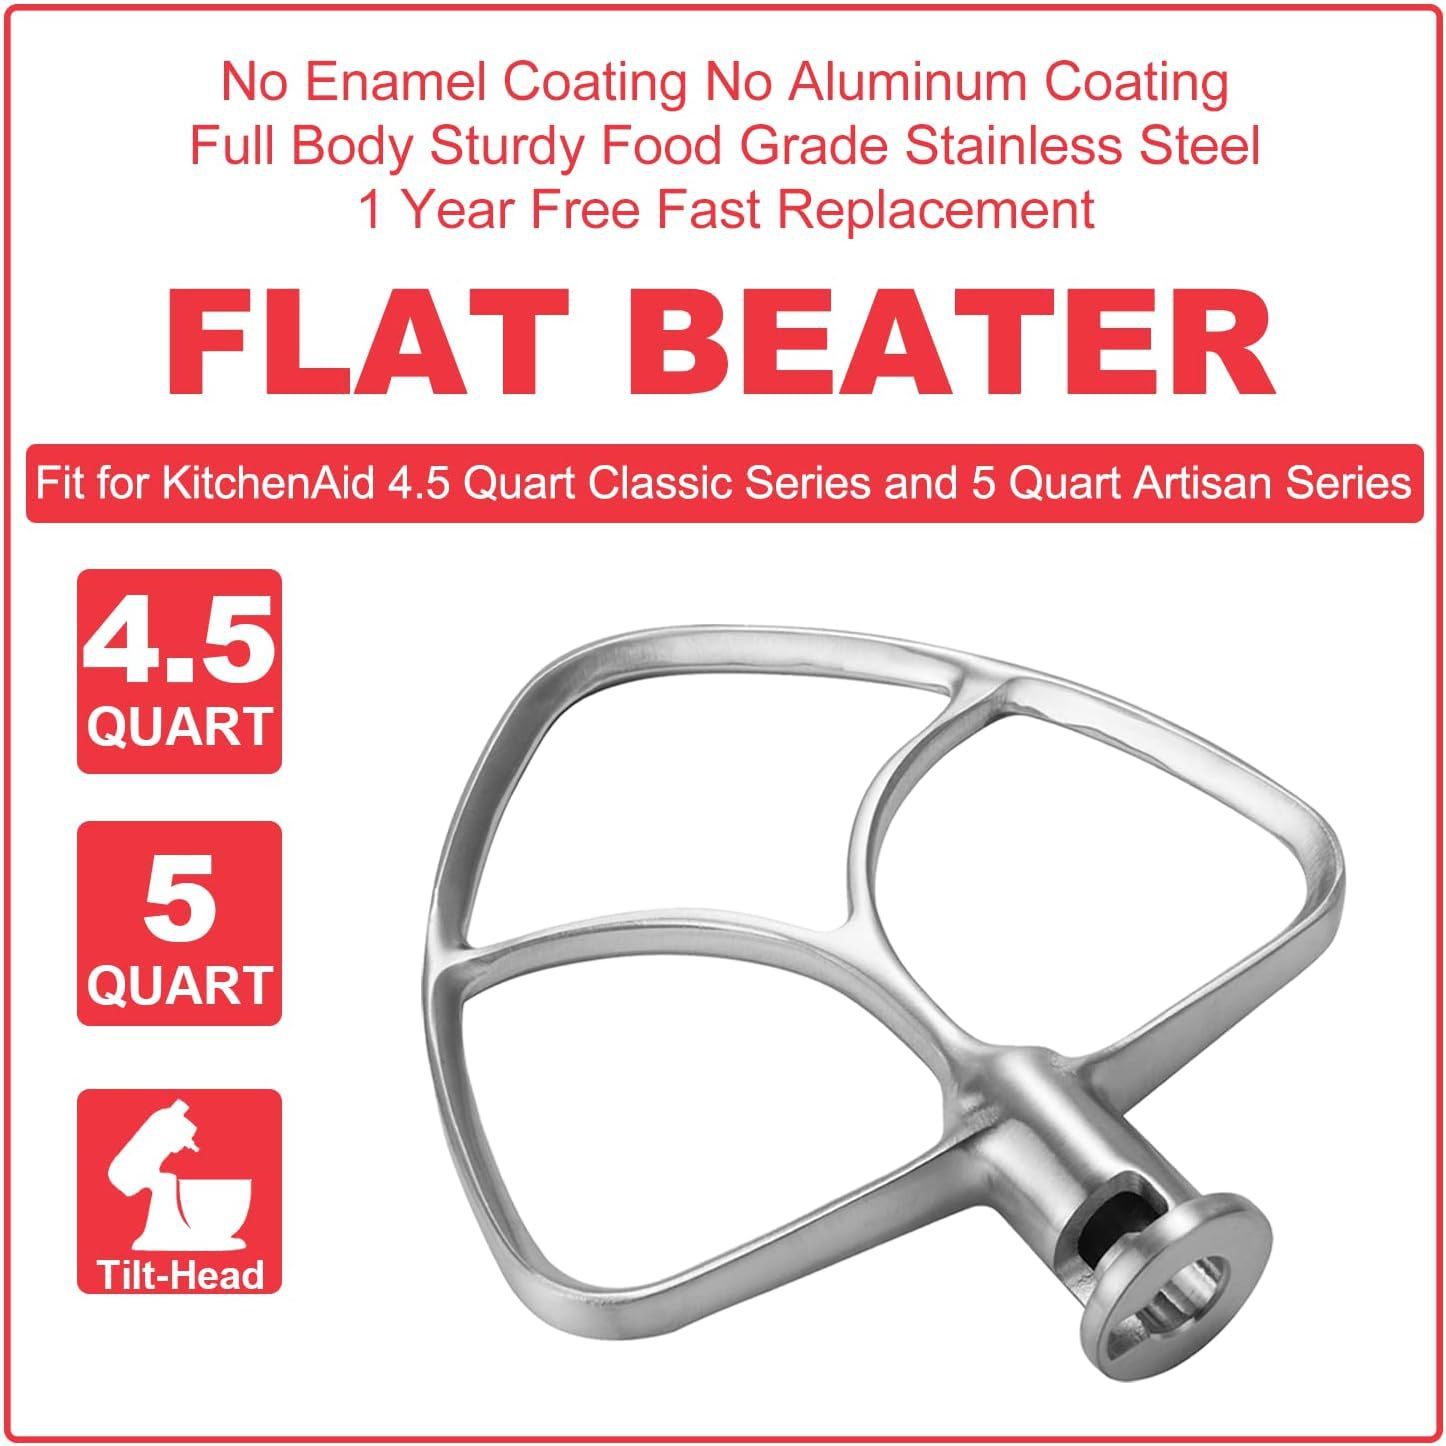 Burnished Stainless Flat Beater for KitchenAid 6 Qt. Tilt-Head